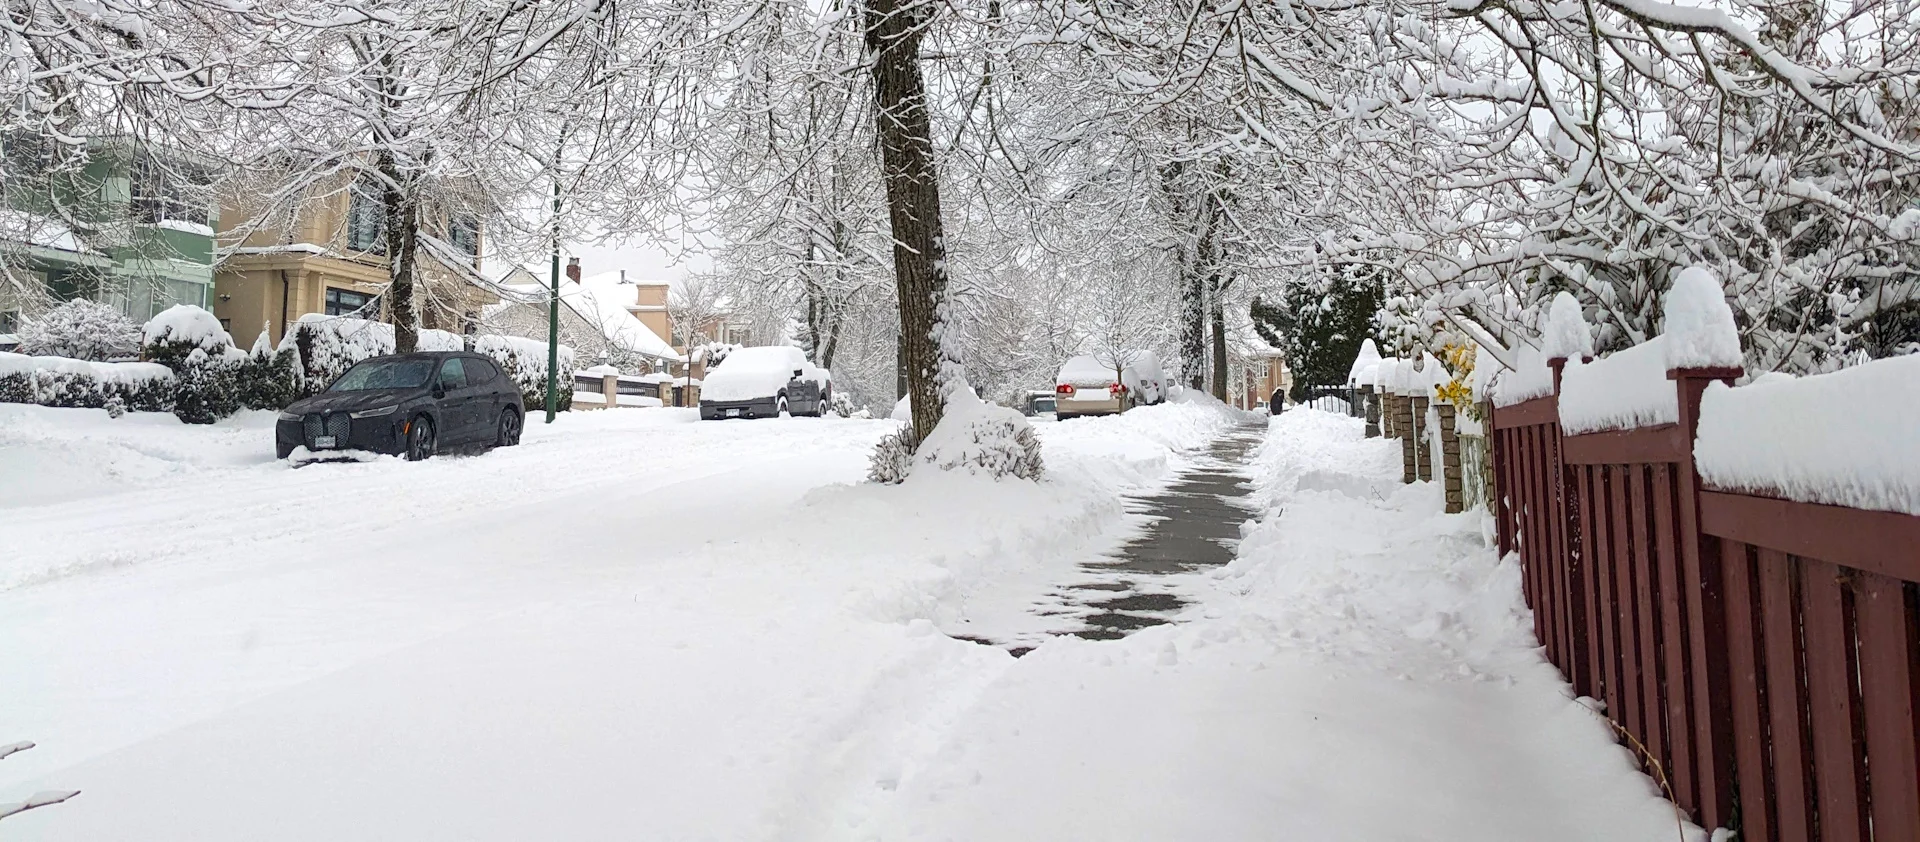 Vancouver has seen 37 cm of snow this winter. Is that it for the season?